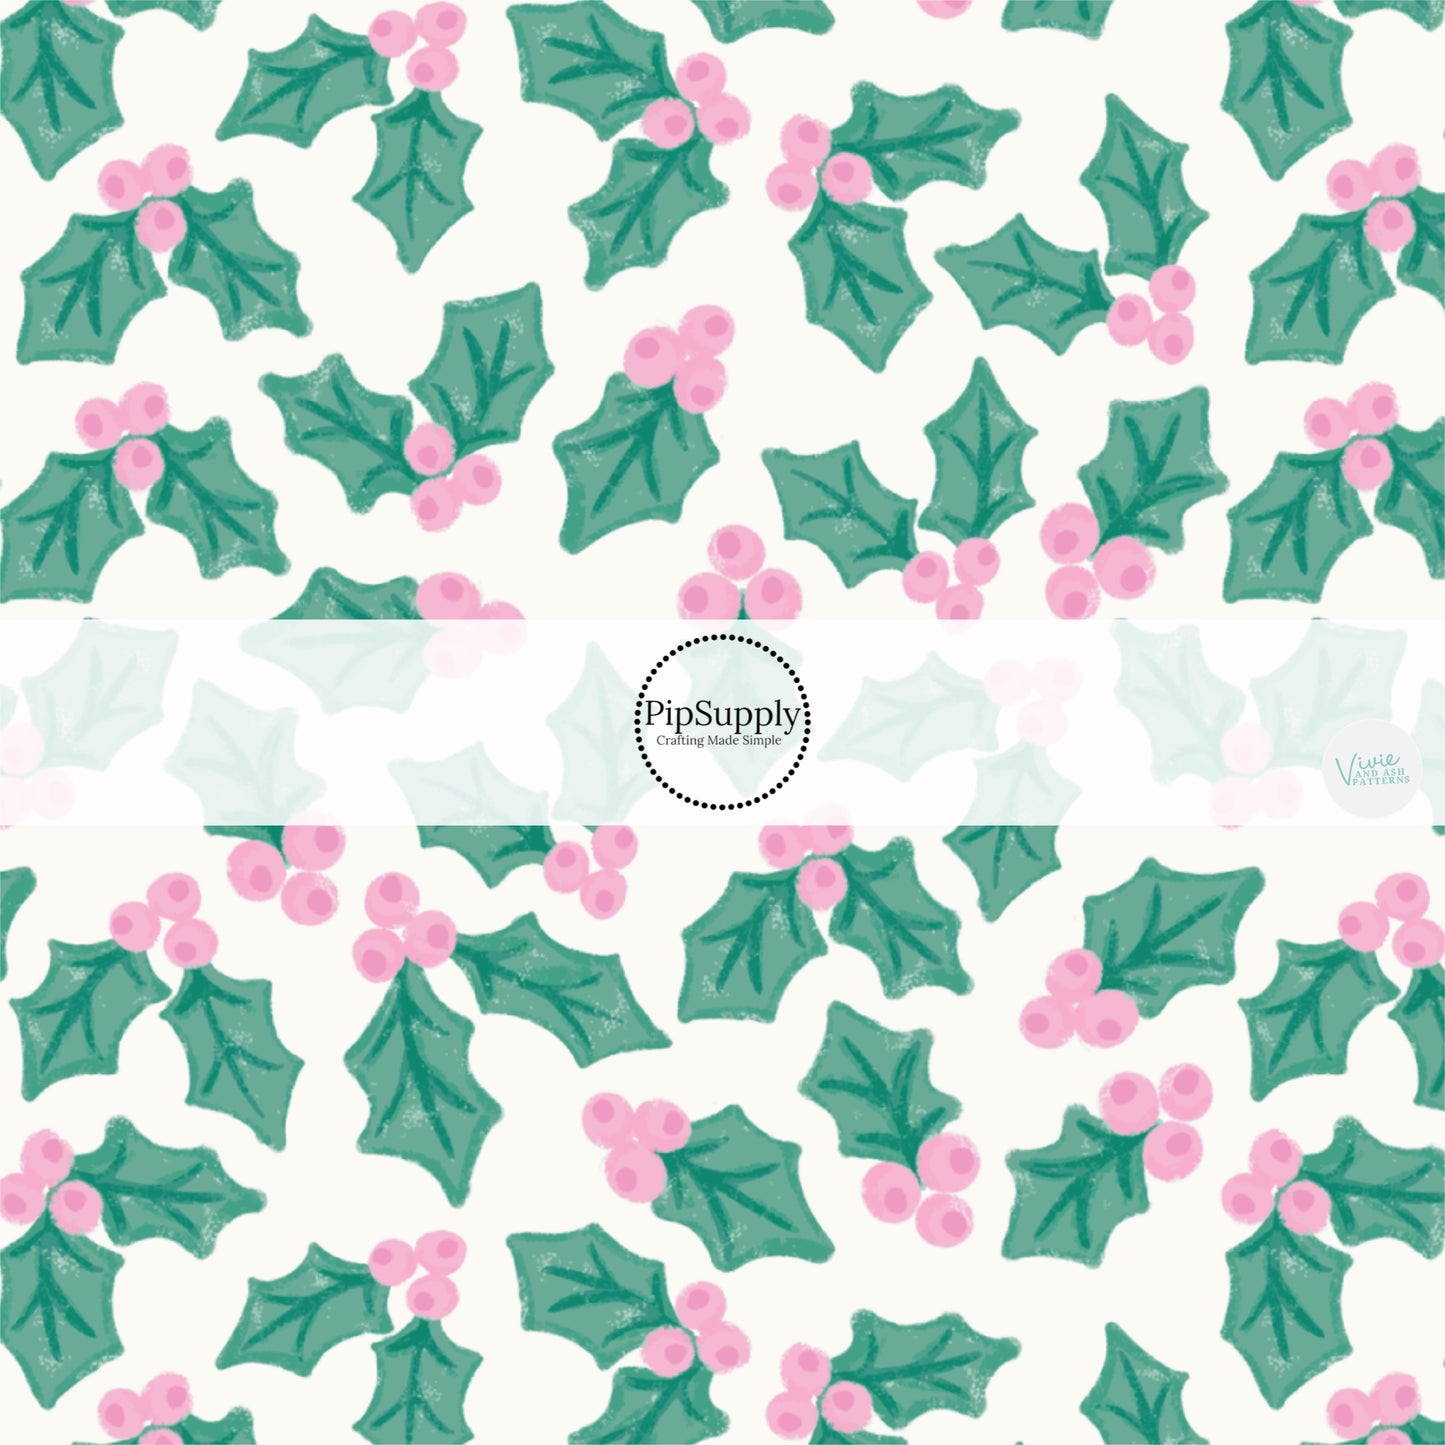 Cream fabric by the yard with green holly leaves and pink berries.